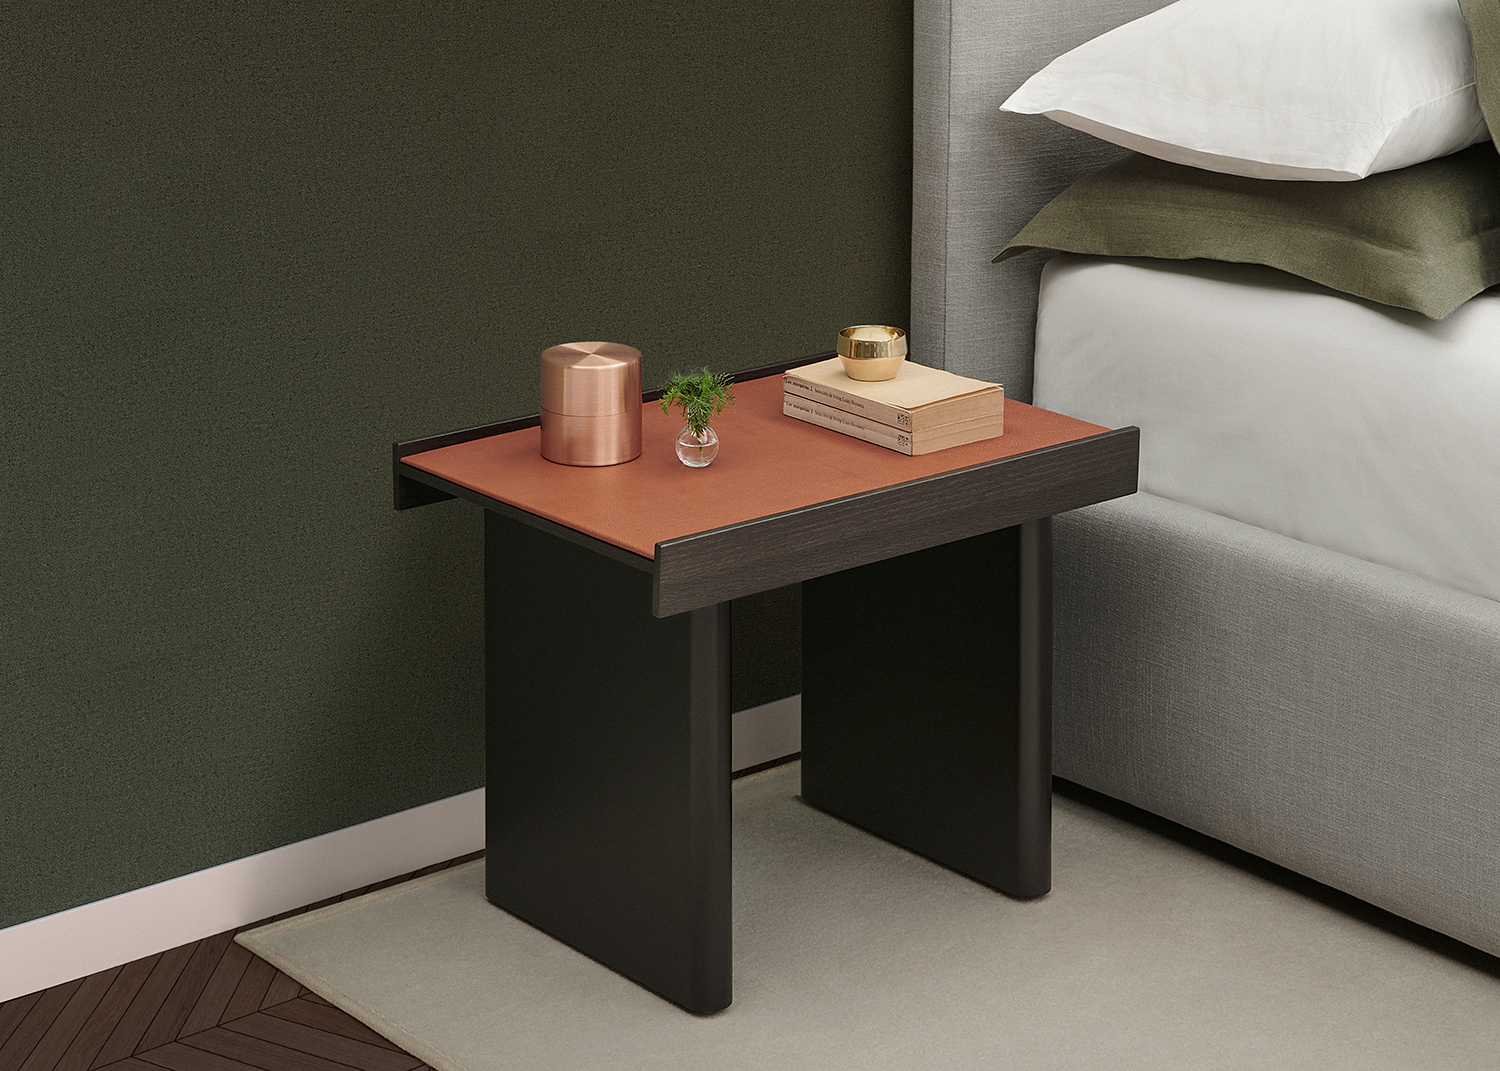 Mika bedside table by Mario Ruiz for Joquer